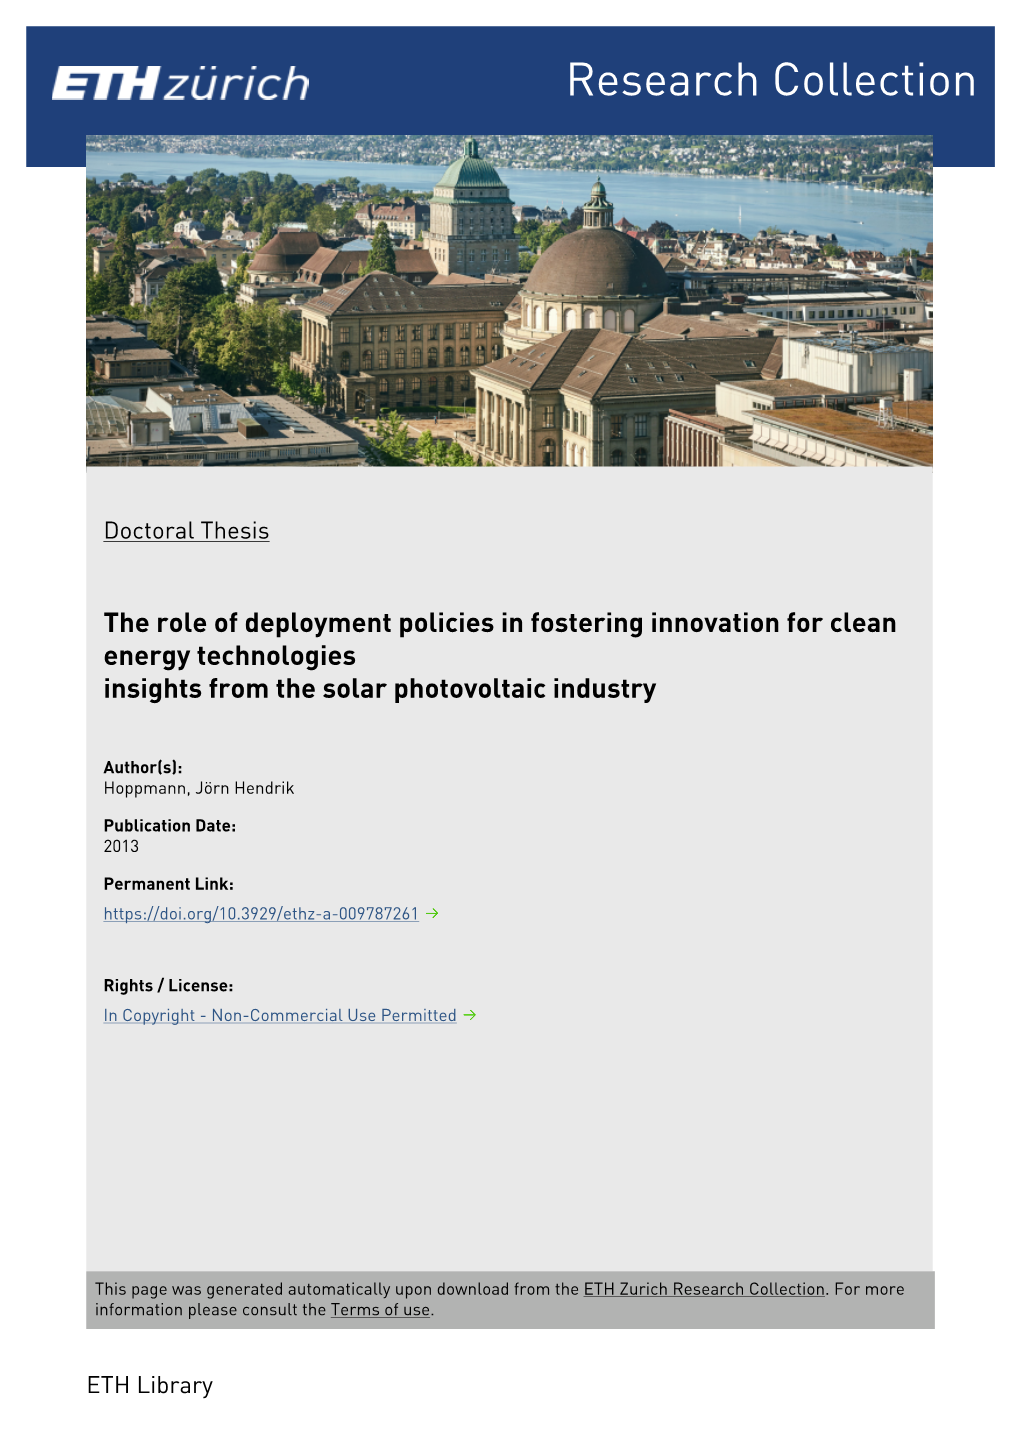 The Role of Deployment Policies in Fostering Innovation for Clean Energy Technologies Insights from the Solar Photovoltaic Industry